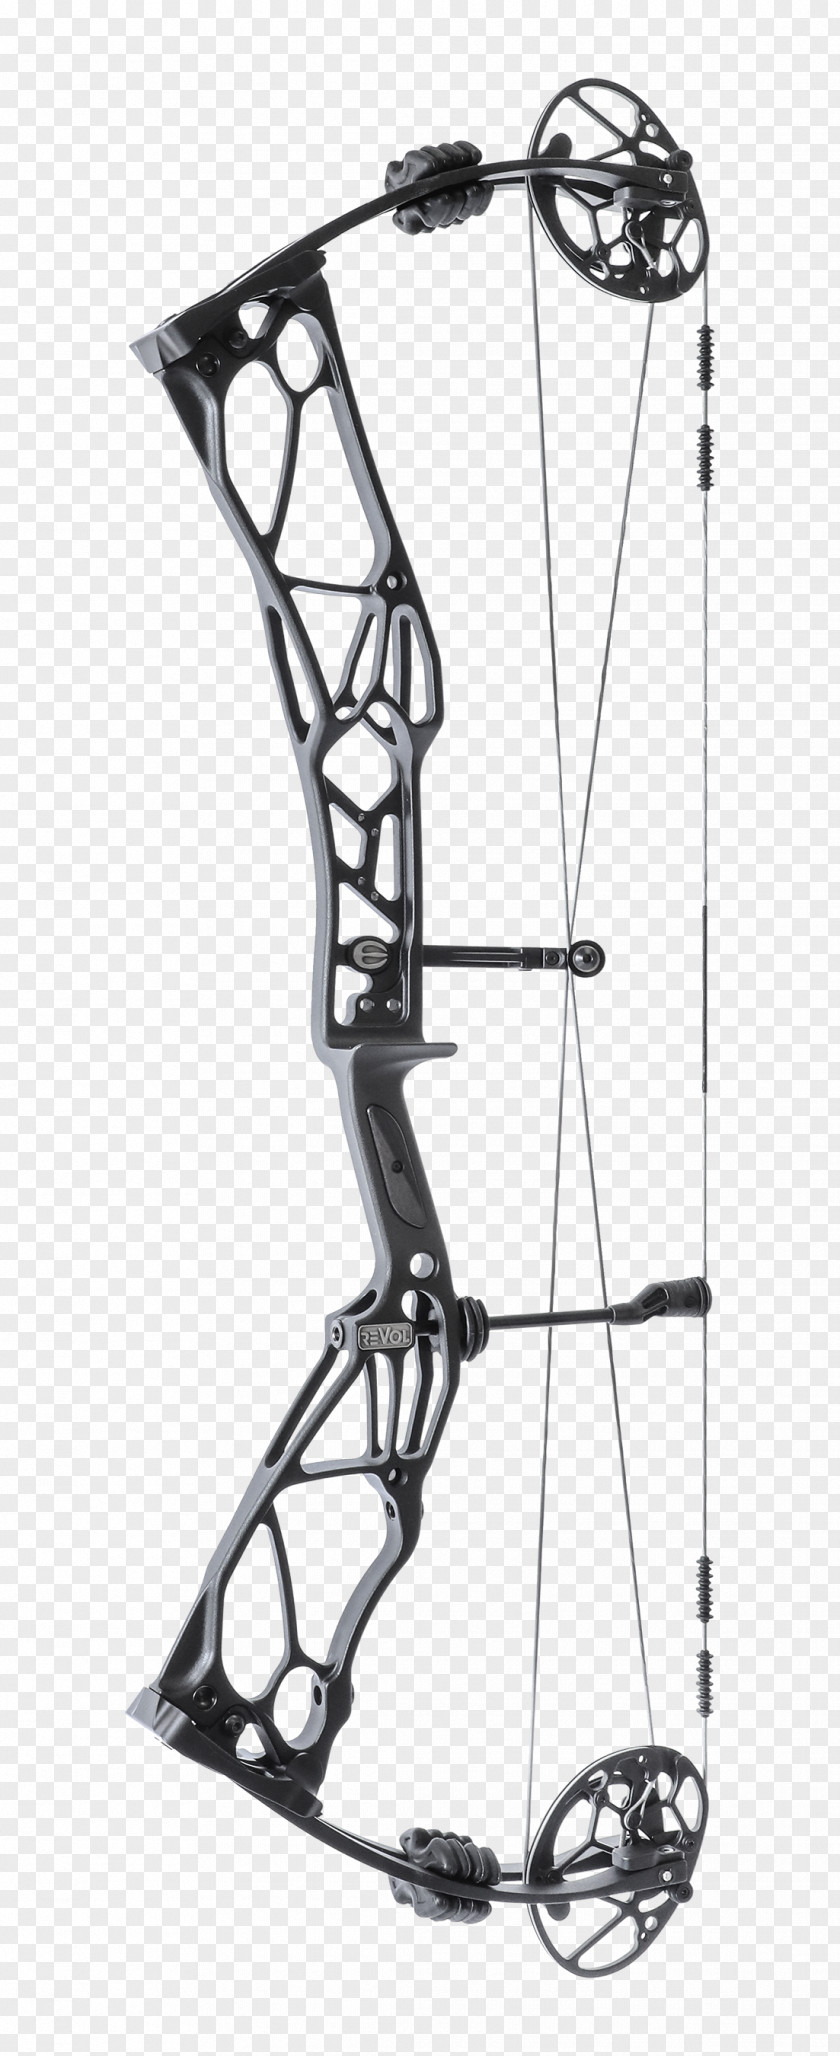 Arrow Bow And Compound Bows Archery Crossbow Bowhunting PNG